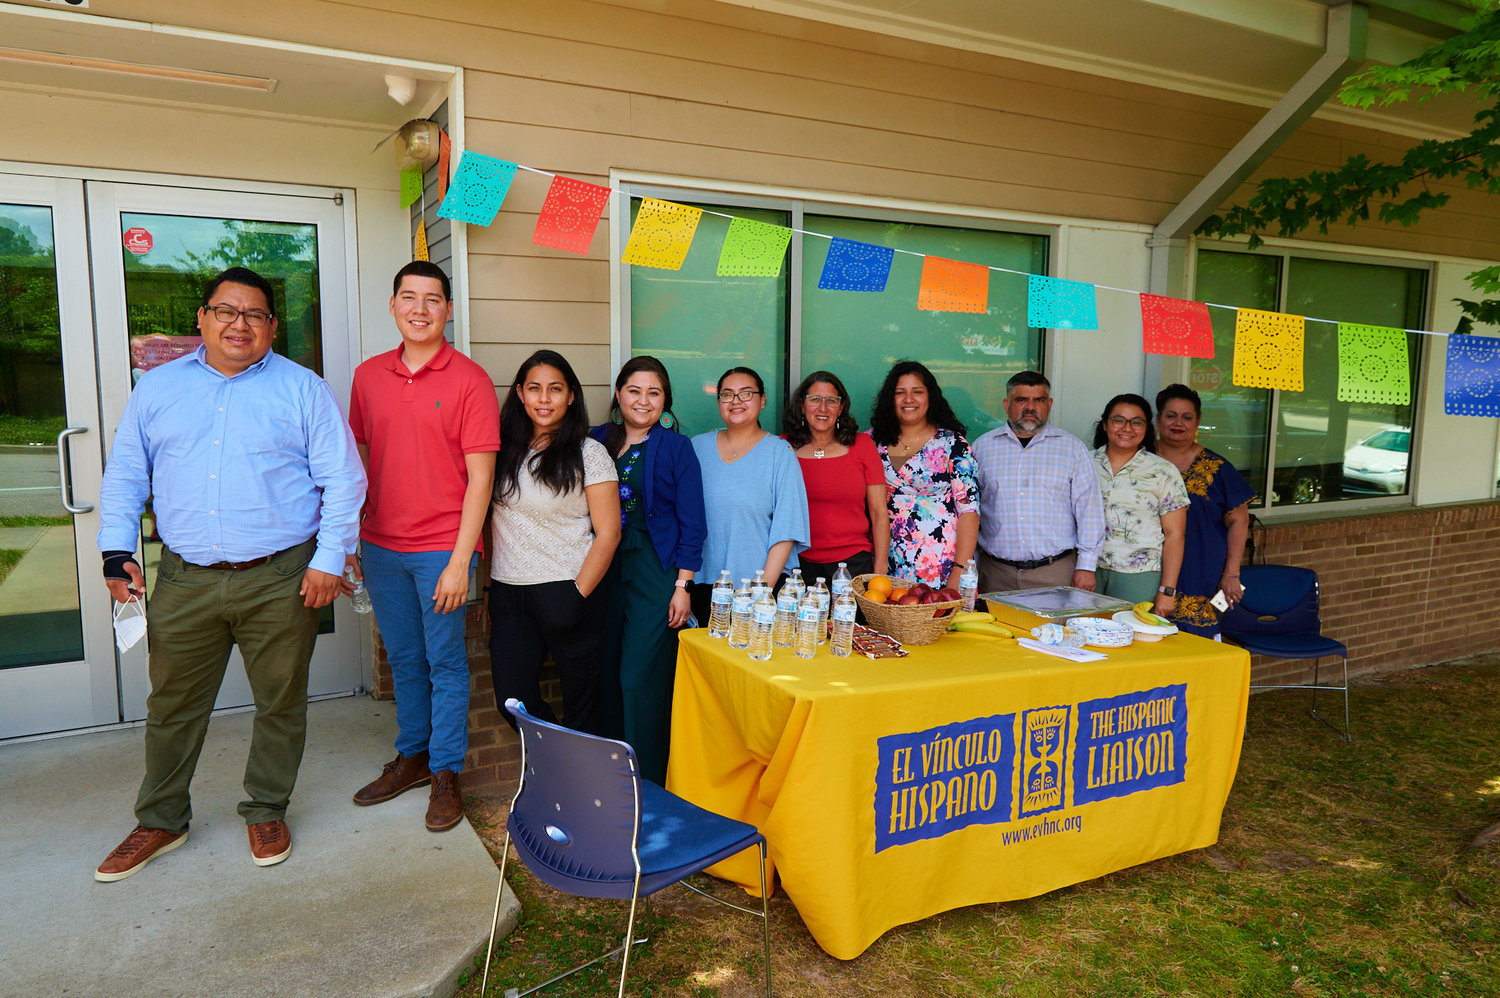 The Hispanic Liaison held a "soft opening" for its new Lee County satellite office on Tuesday, June 1. The Liaison’s Hannia Benitez will lead the new Sanford office, which is located at 215 Bracken Street.